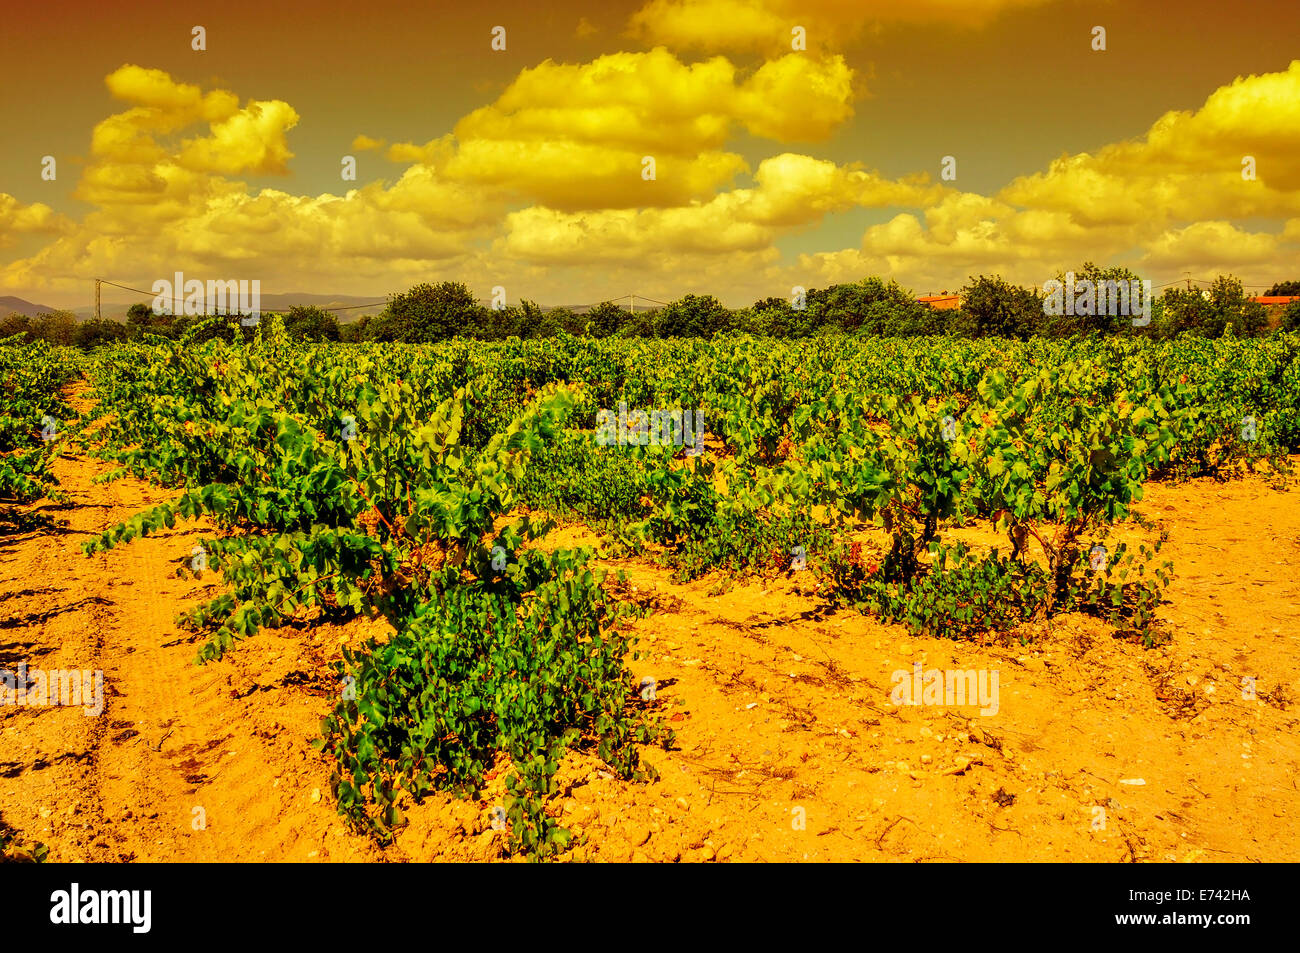 view of a vineyard with ripe grapes in a mediterranean country at sunset Stock Photo